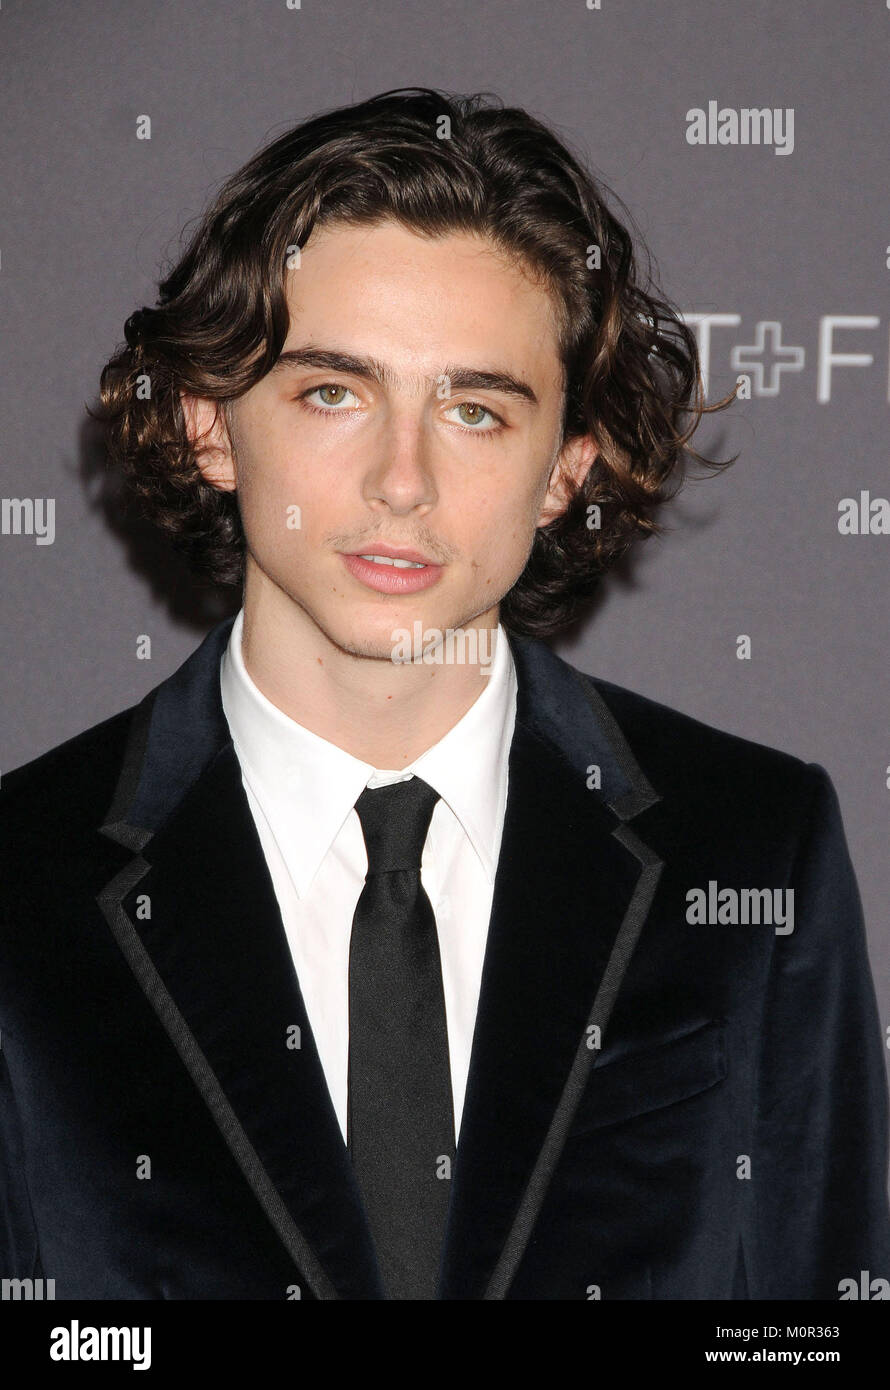 Oscar nominee Timothee Chalamet on 'Call Me by Your Name,' and the